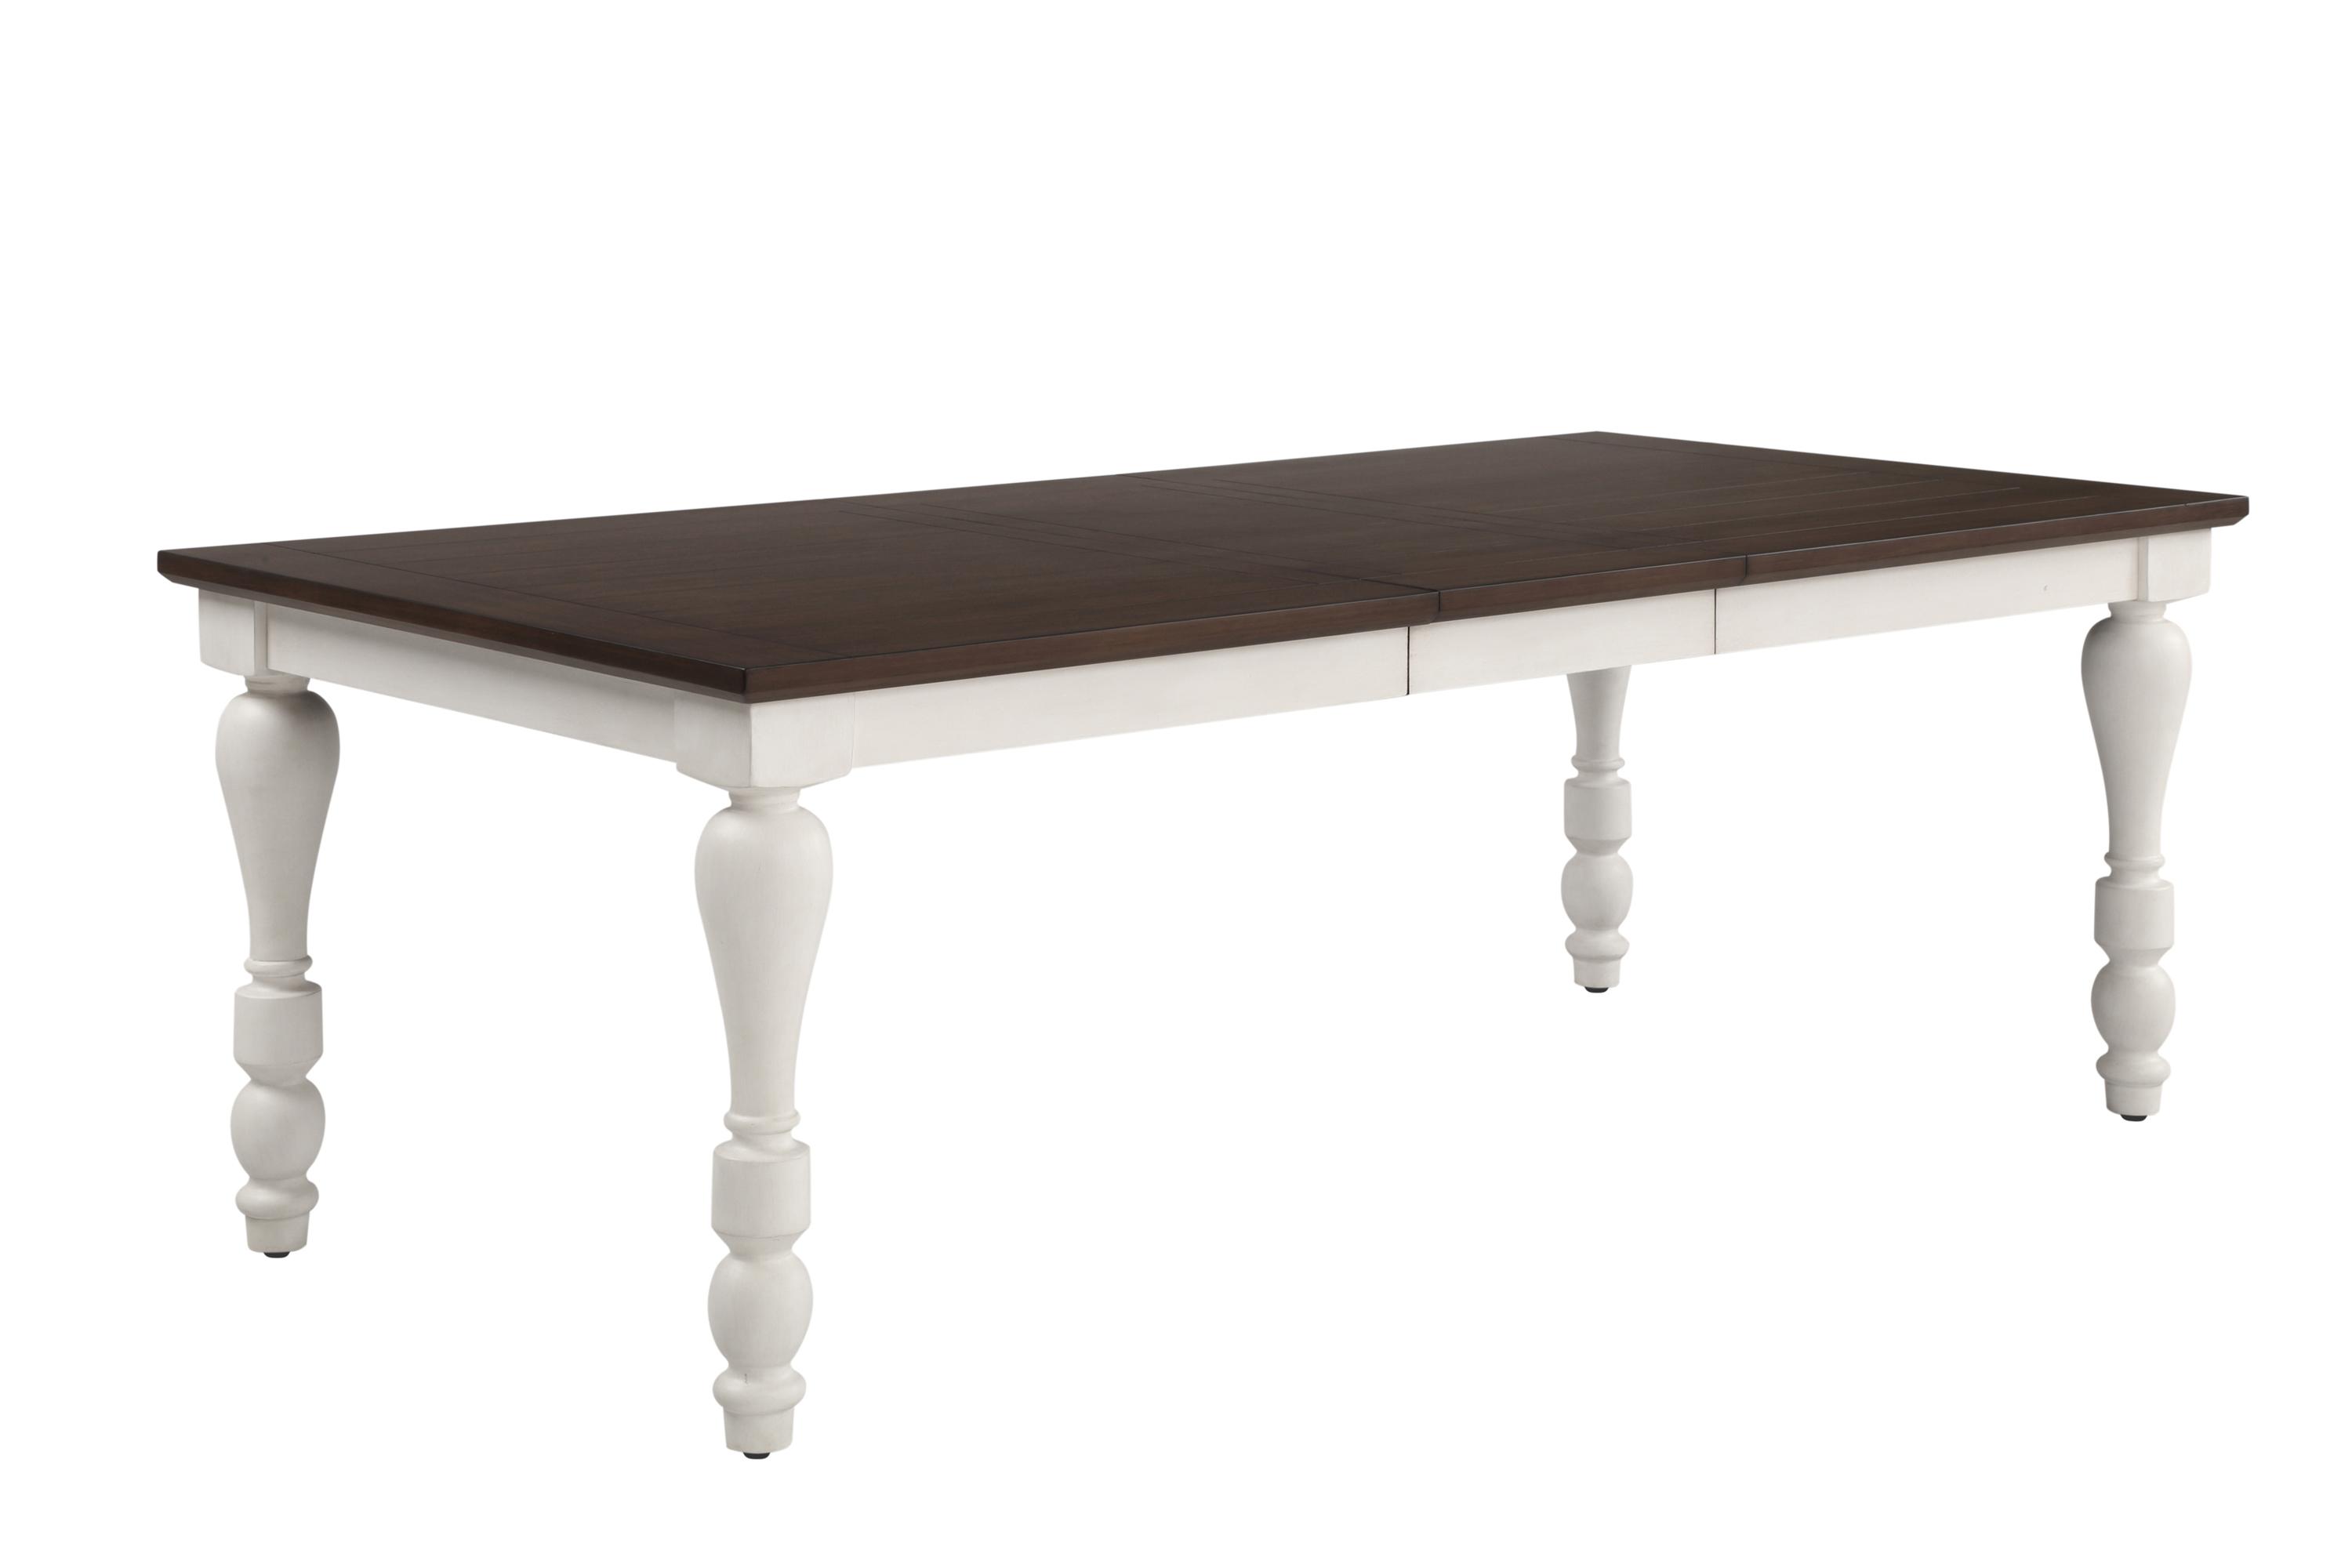 Cottage Dining Table 110381 Madelyn 110381 in Cocoa, White 